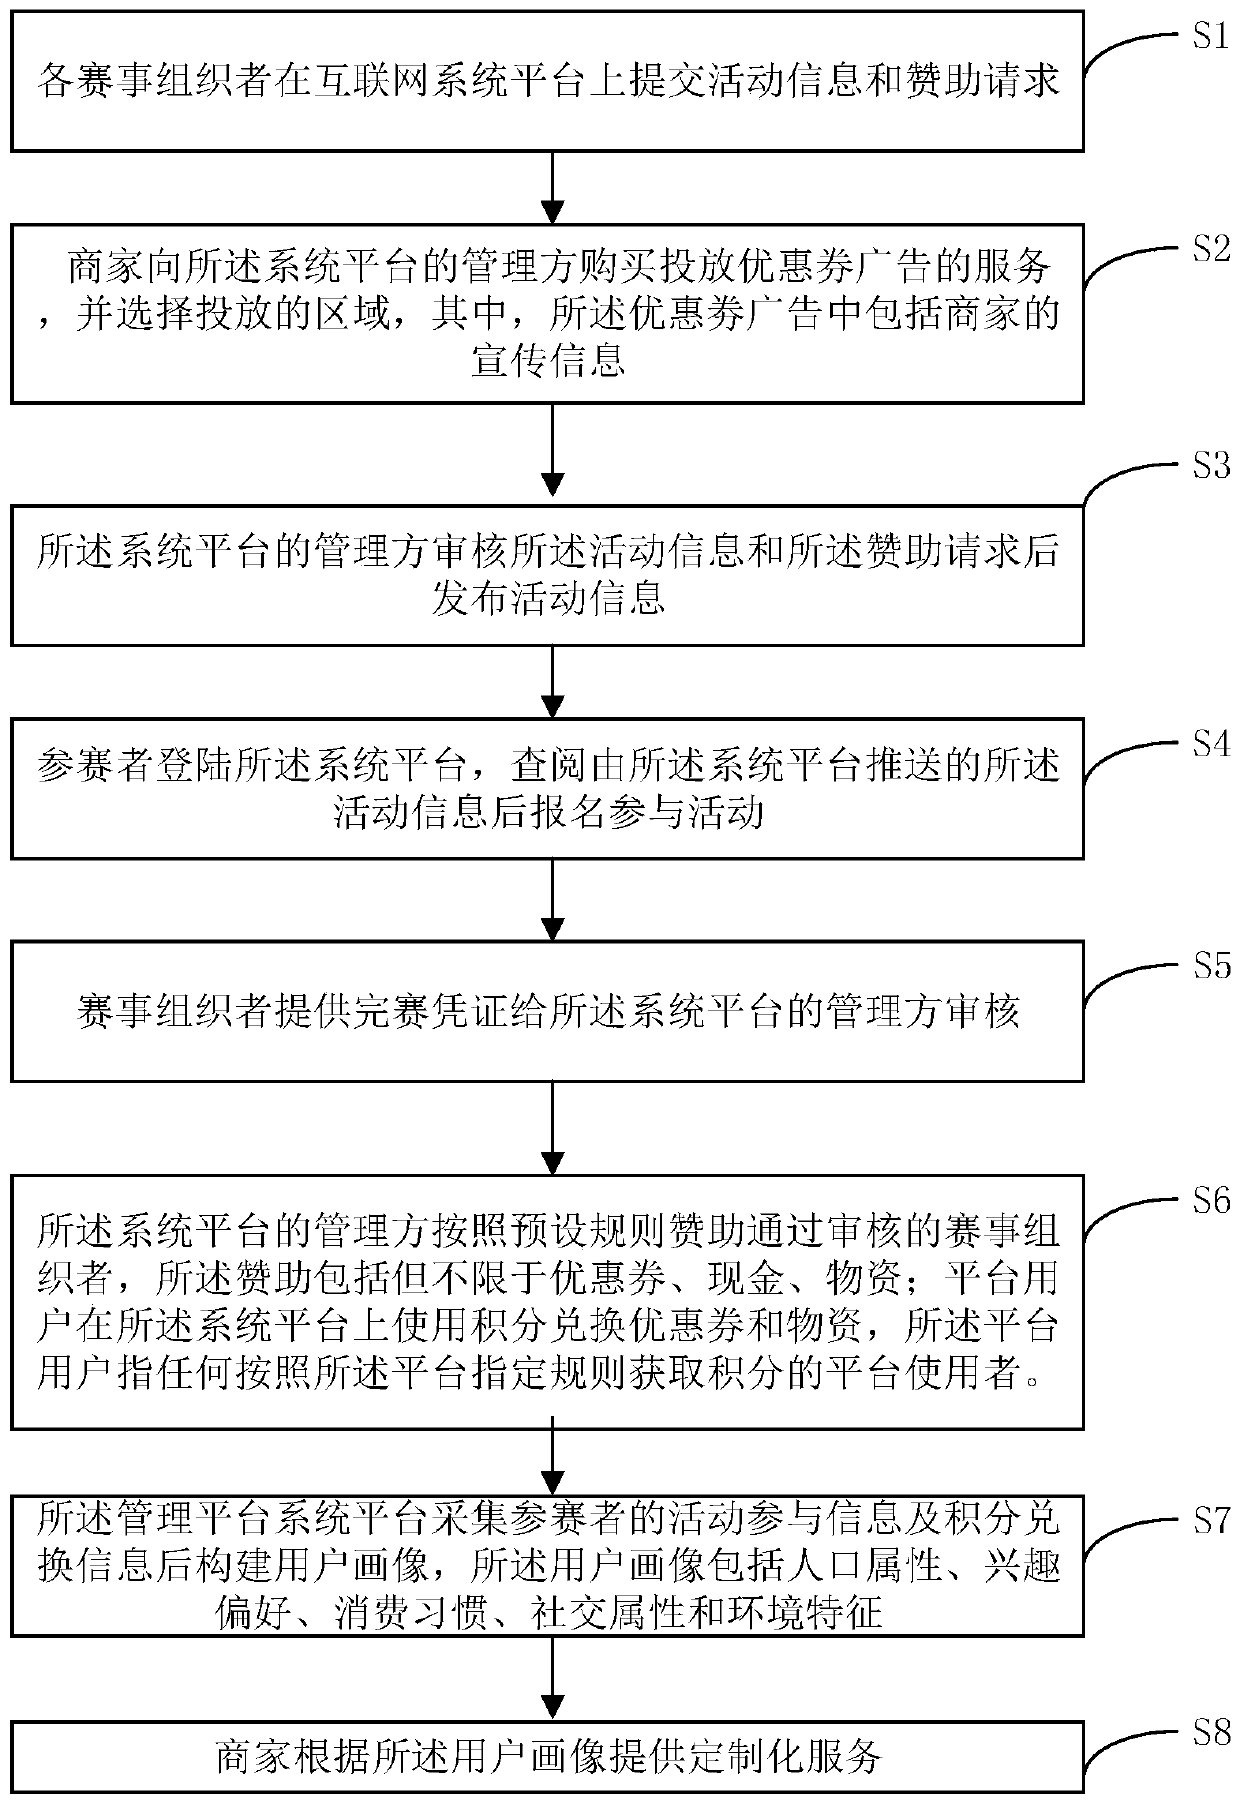 Big data comprehensive management method and system for community recreational and sports activities and commercial operation